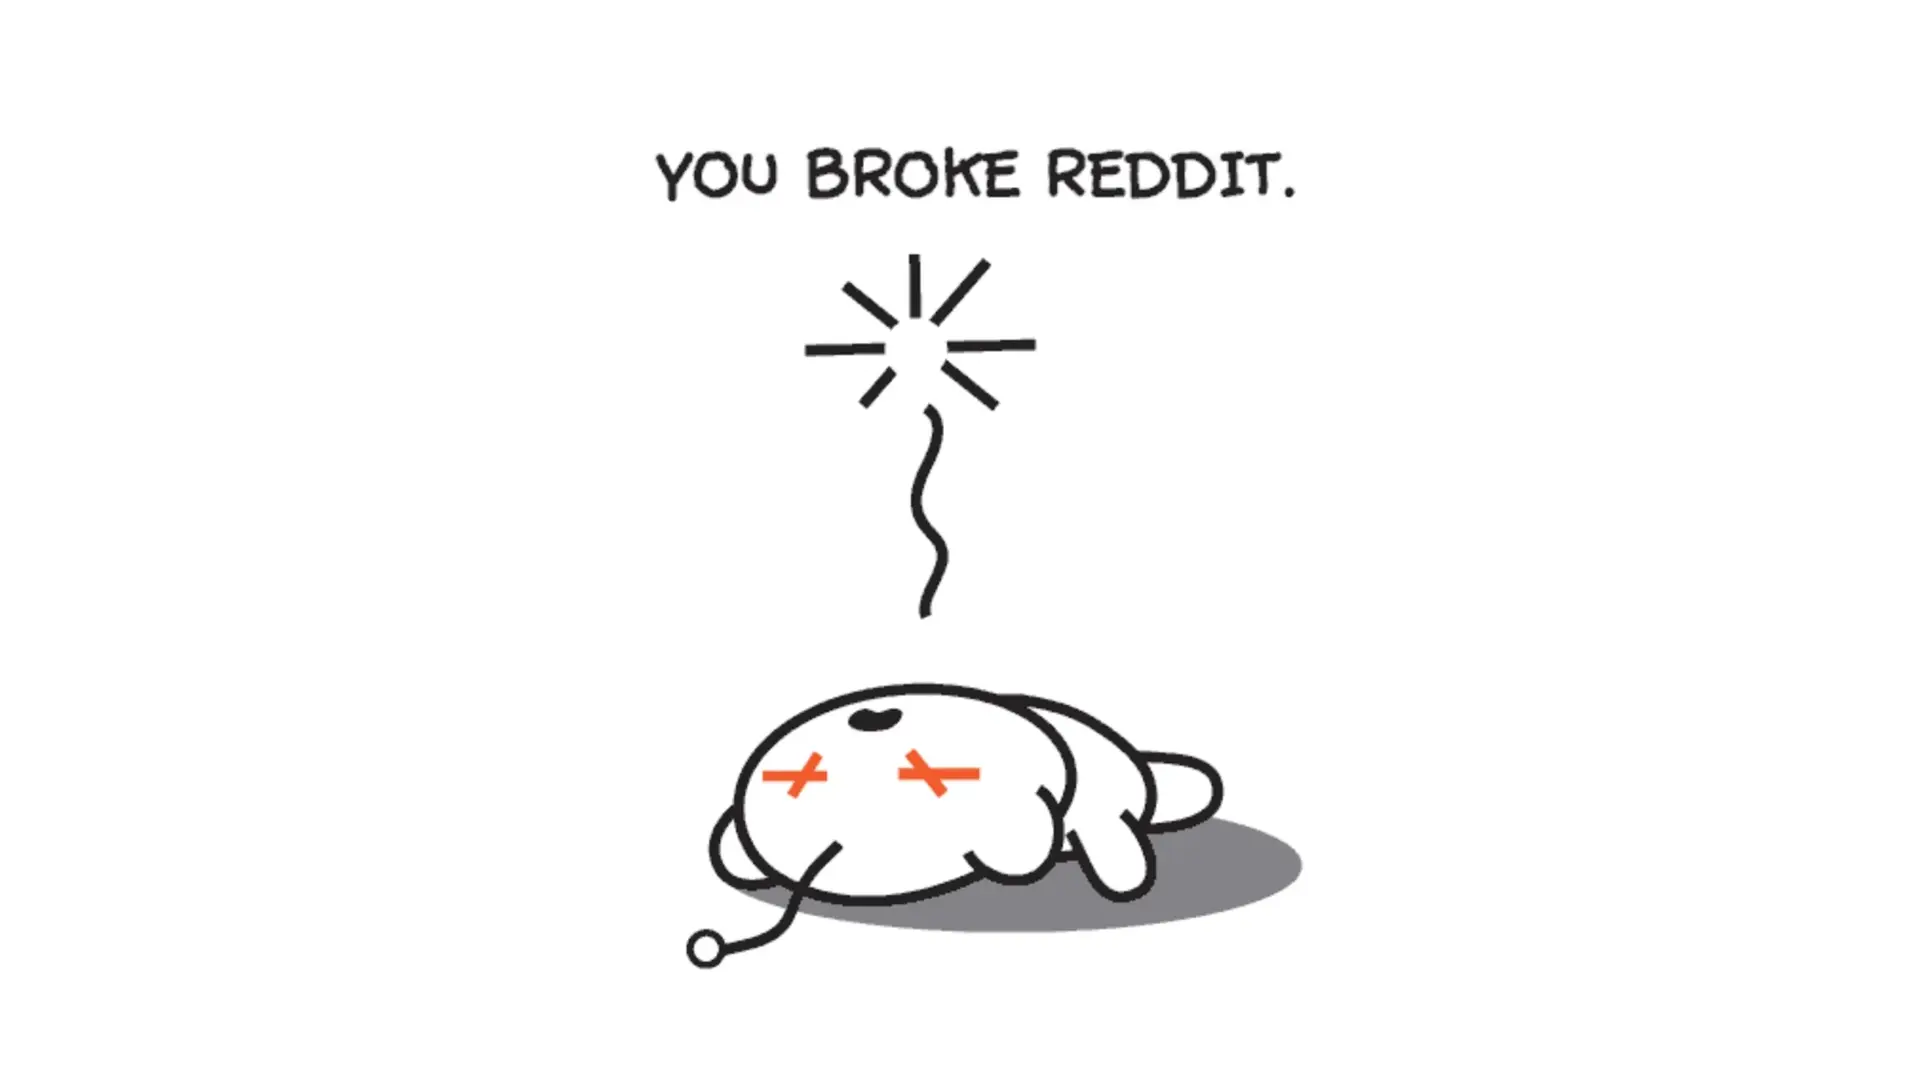 Reddit Down and Showing as 504 Gateway Timeout for Users This April 25